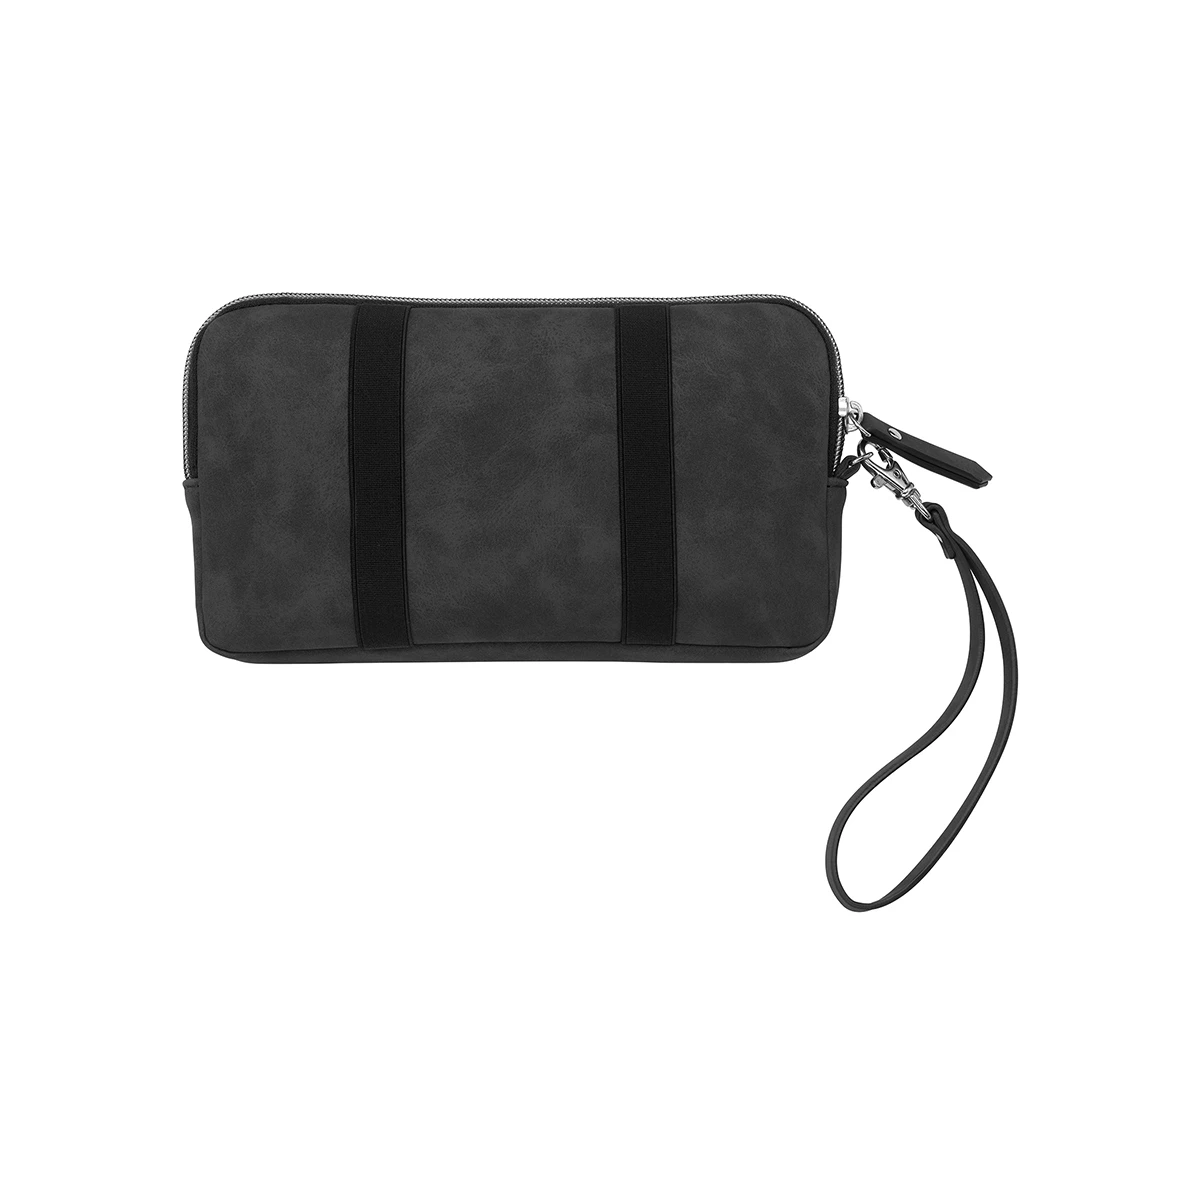 Wipes Case Wristlet - Charcoal